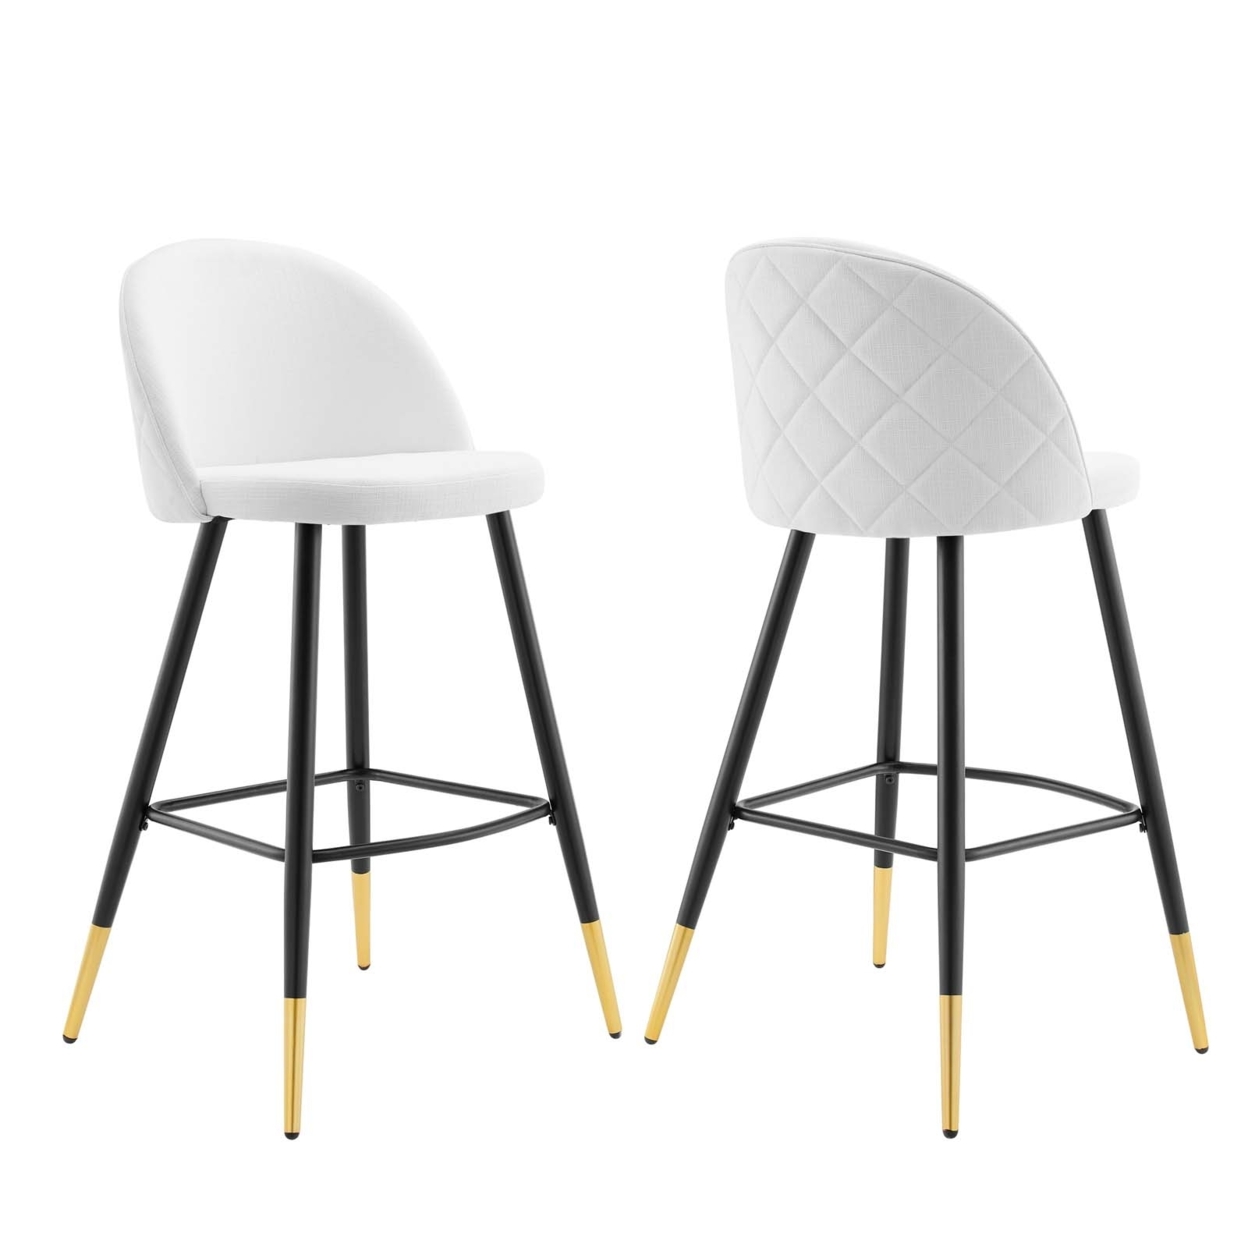 Cordial Fabric Bar Stools - Set Of 2, White